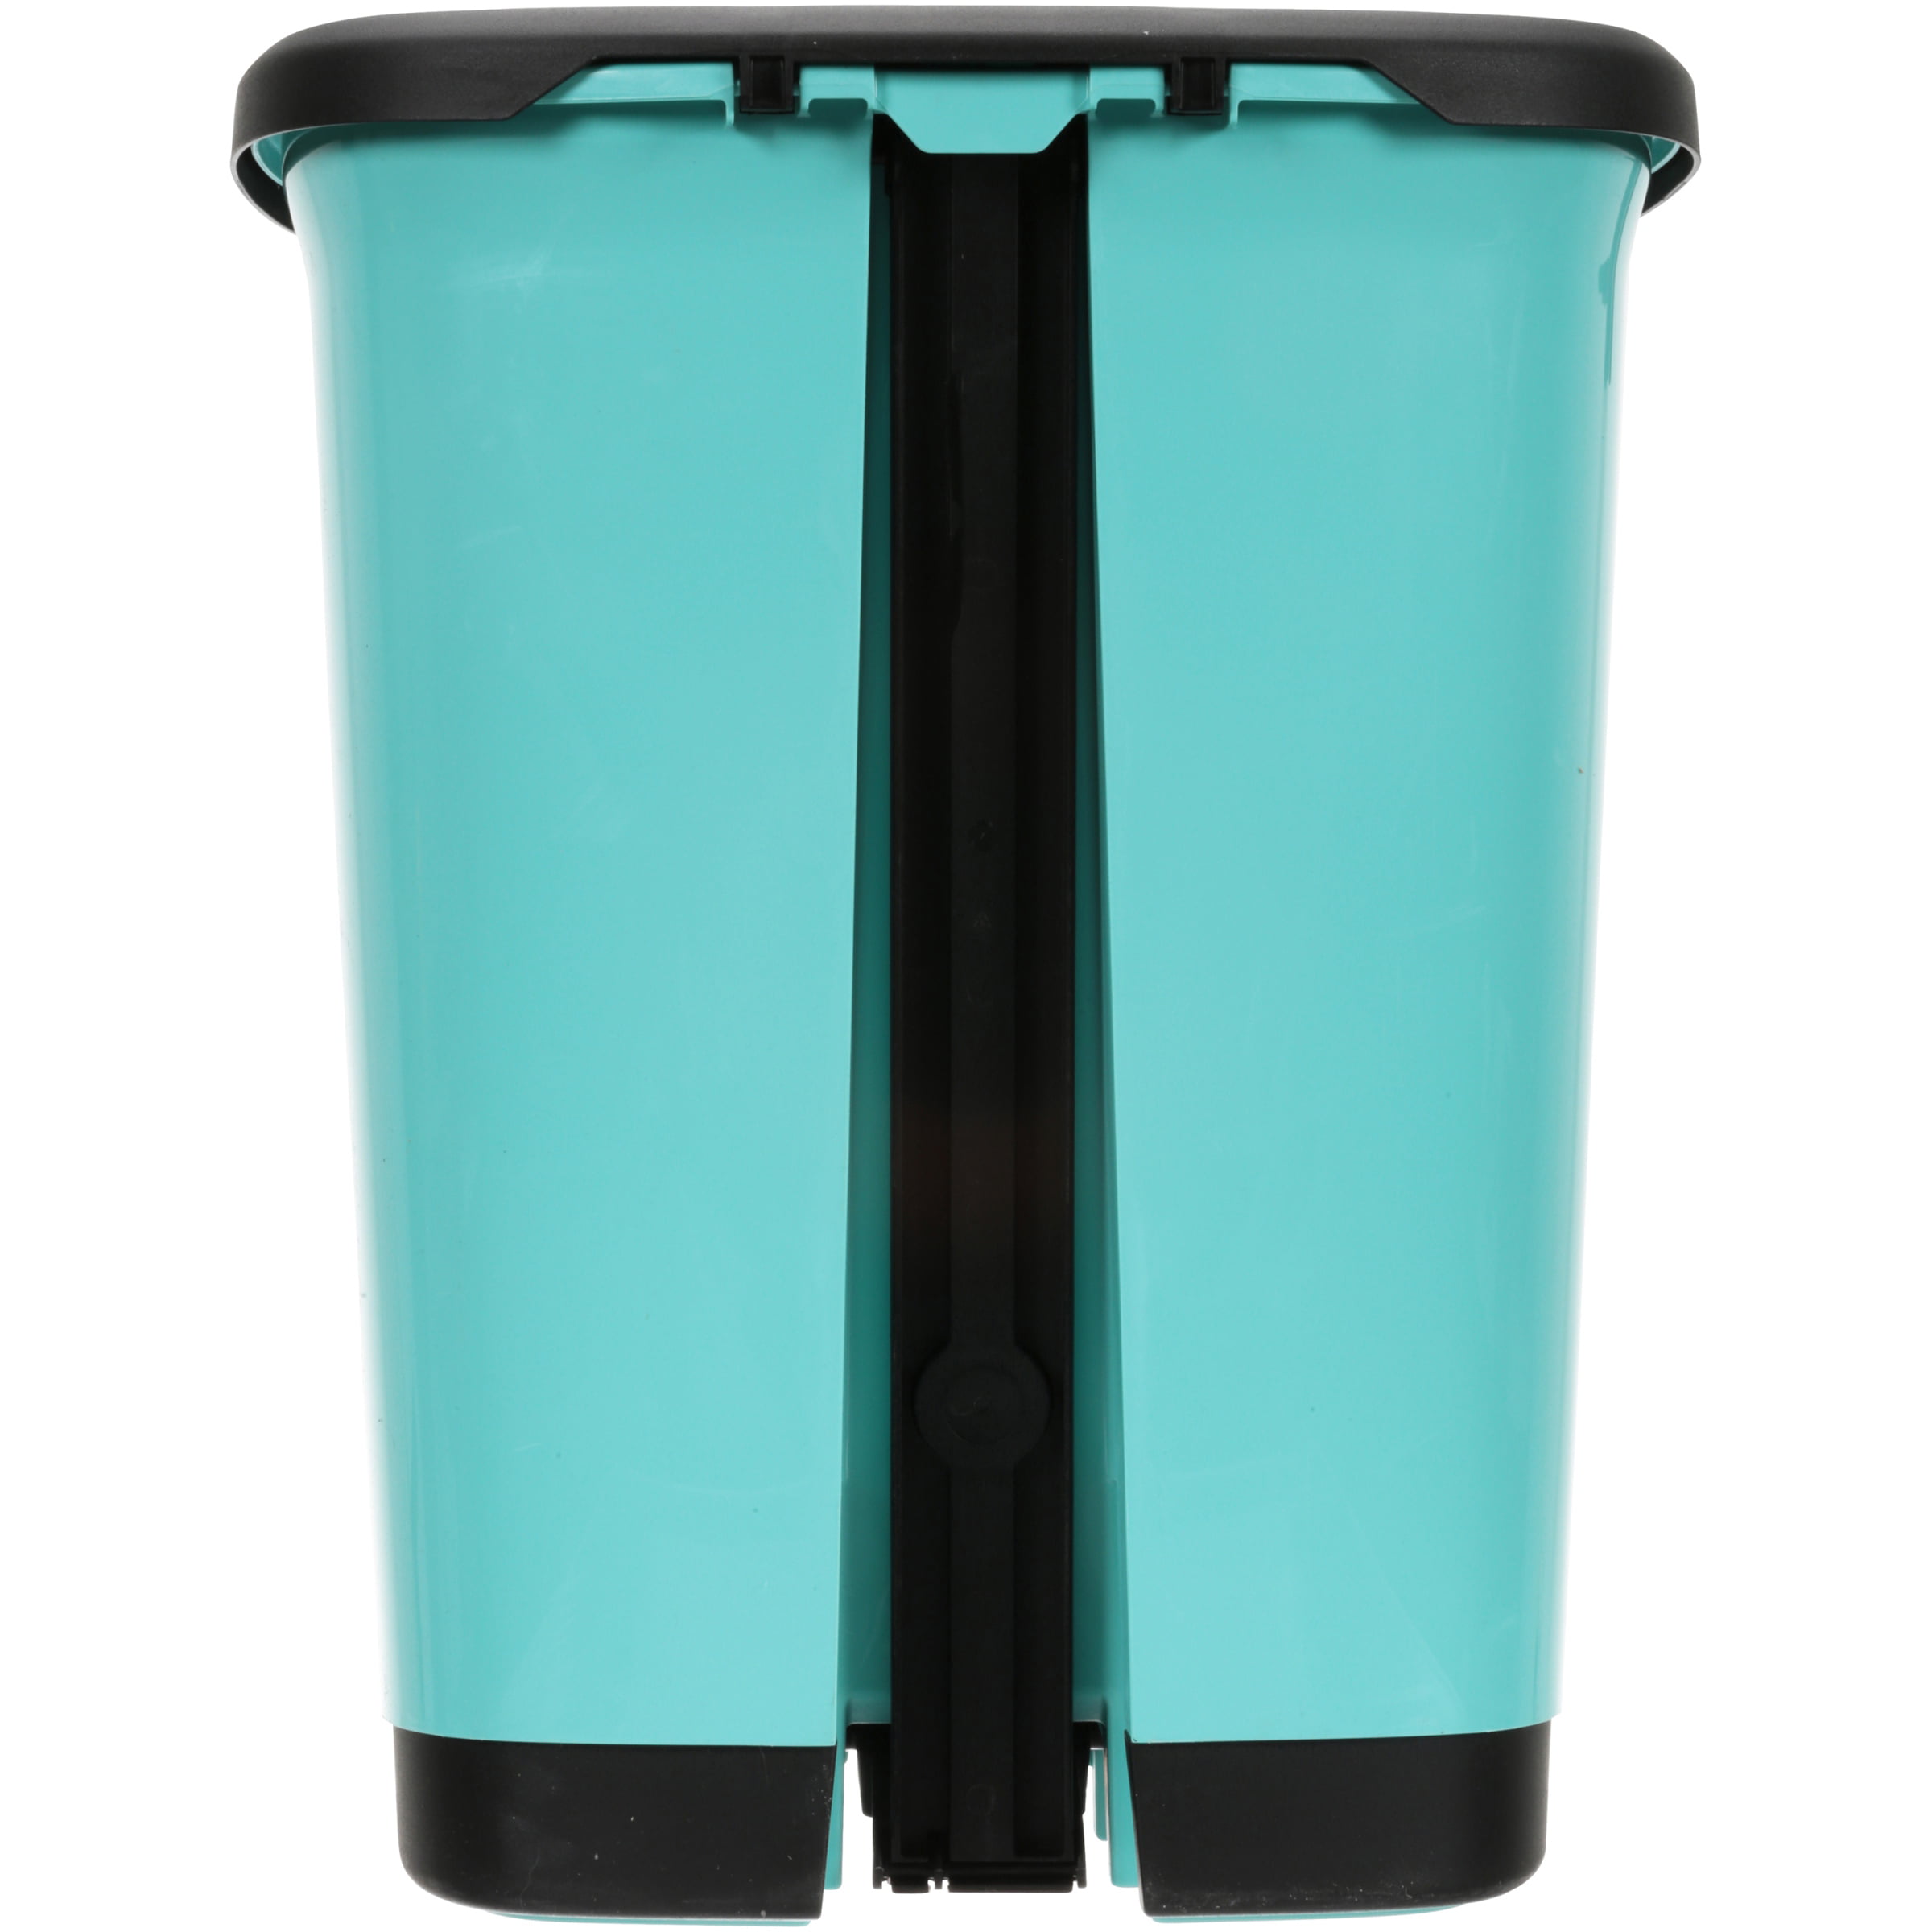 Hefty Touch-Lid Trash Cans are down to $8.50 at Walmart (Reg. up